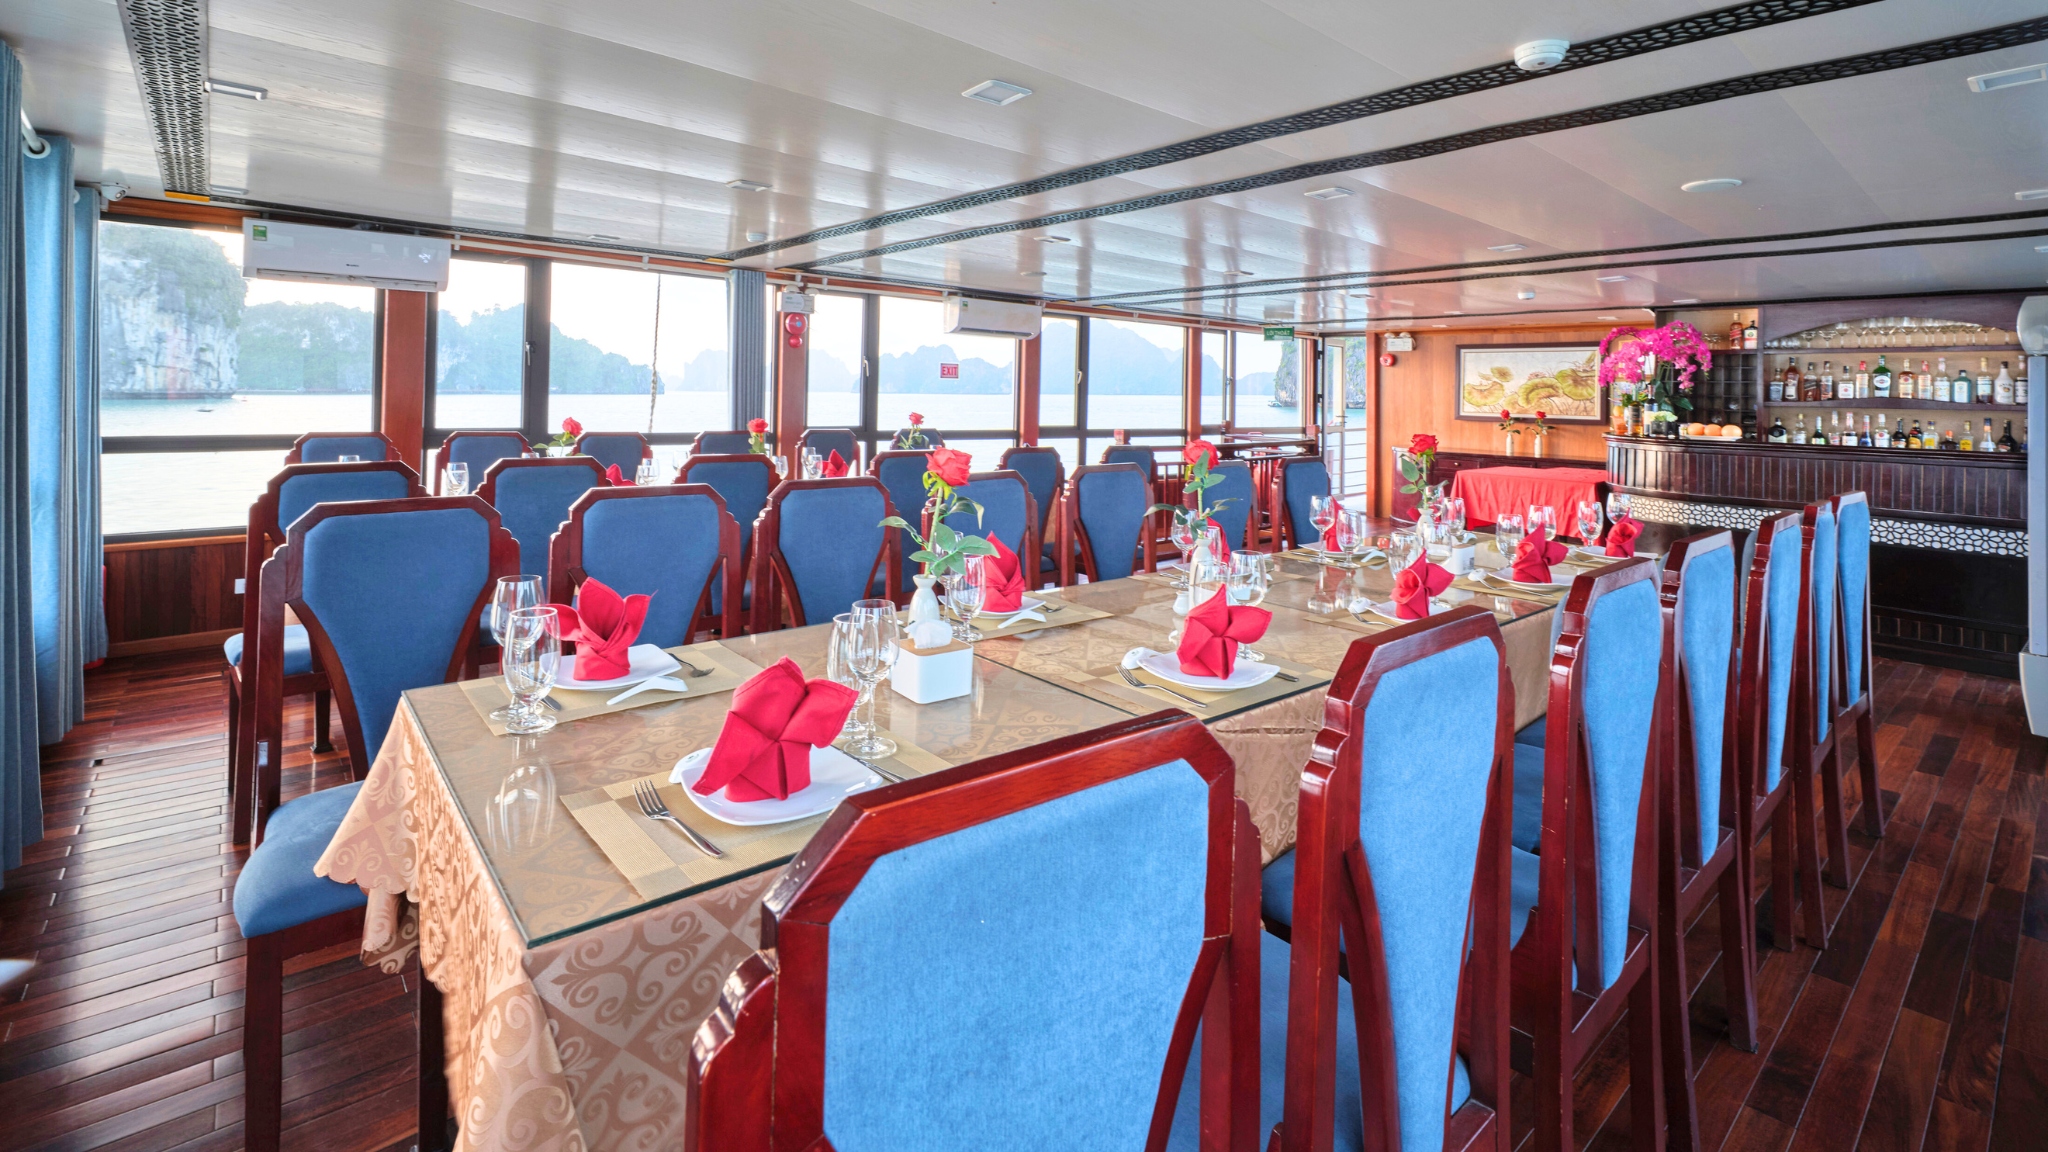 The Dining area and Bar on board